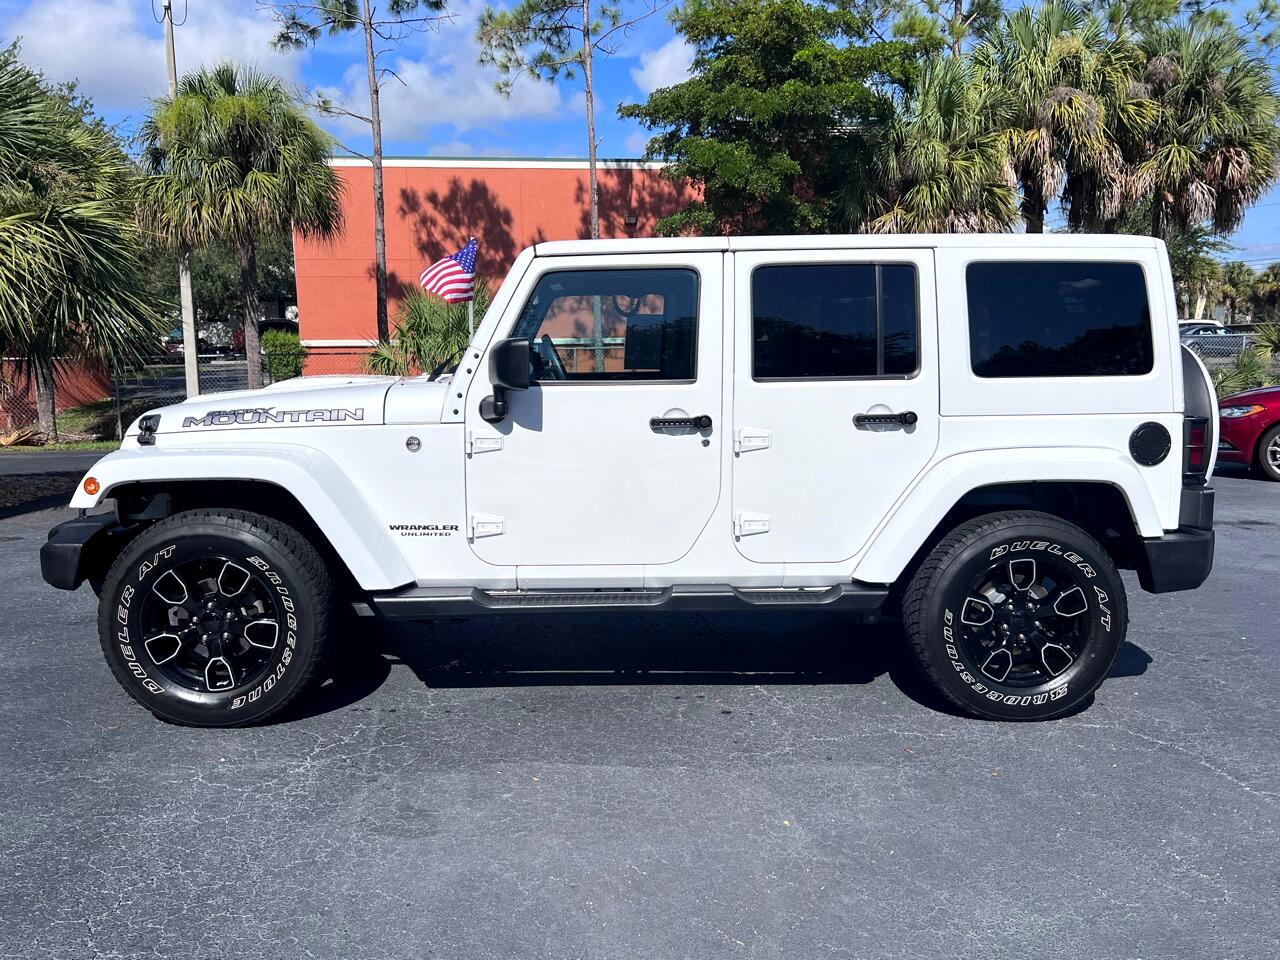 Used 2017 Jeep Wrangler Unlimited Sahara Smoky Mountain Edition 4x4 for  Sale in Fort Myers FL 33912 Beach Buggys